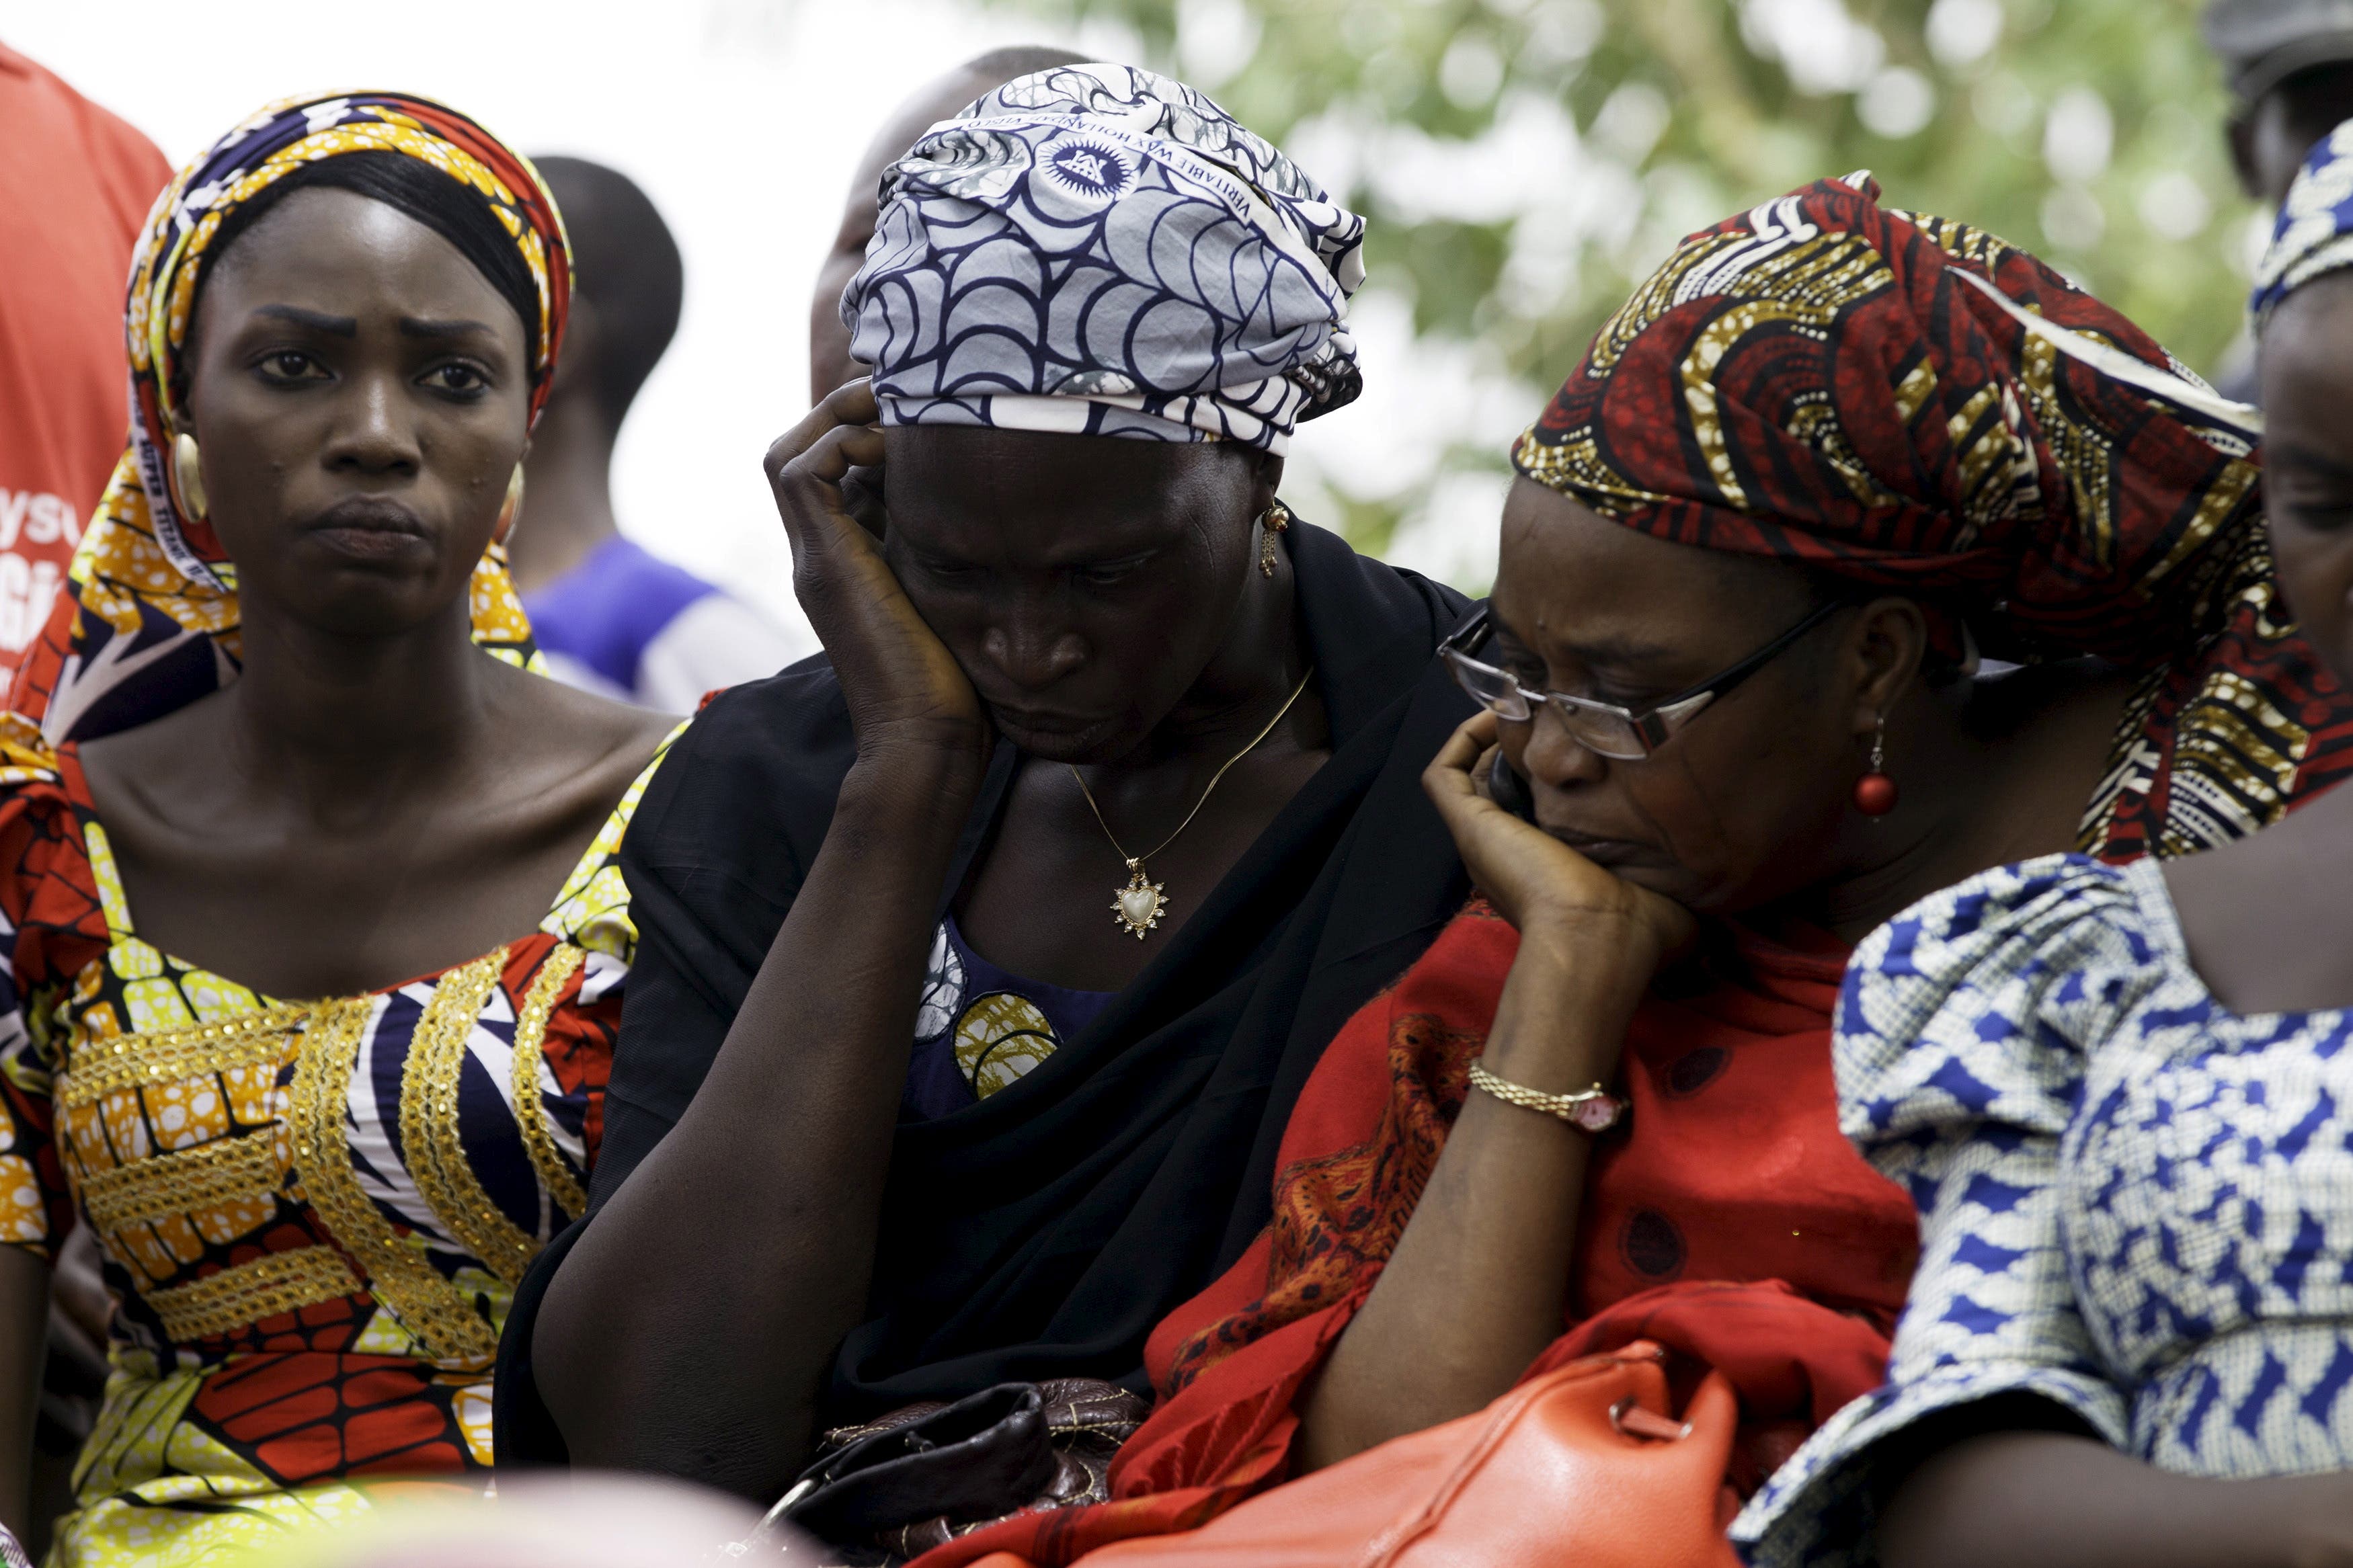 #BringBackOurGirls – One year on